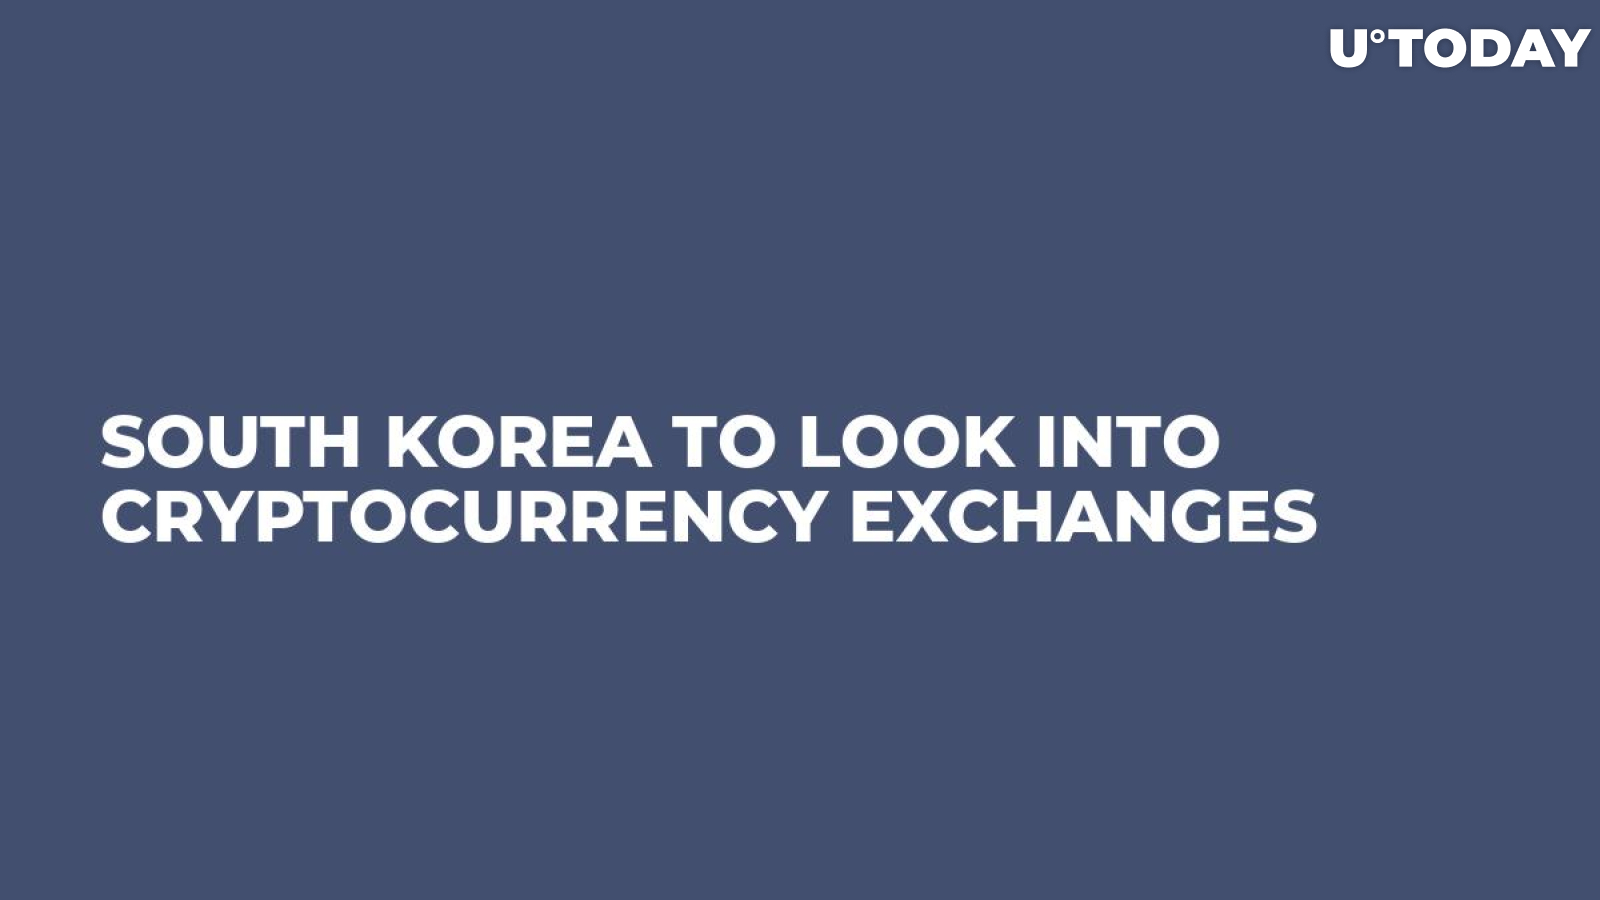 South Korea To Look Into Cryptocurrency Exchanges